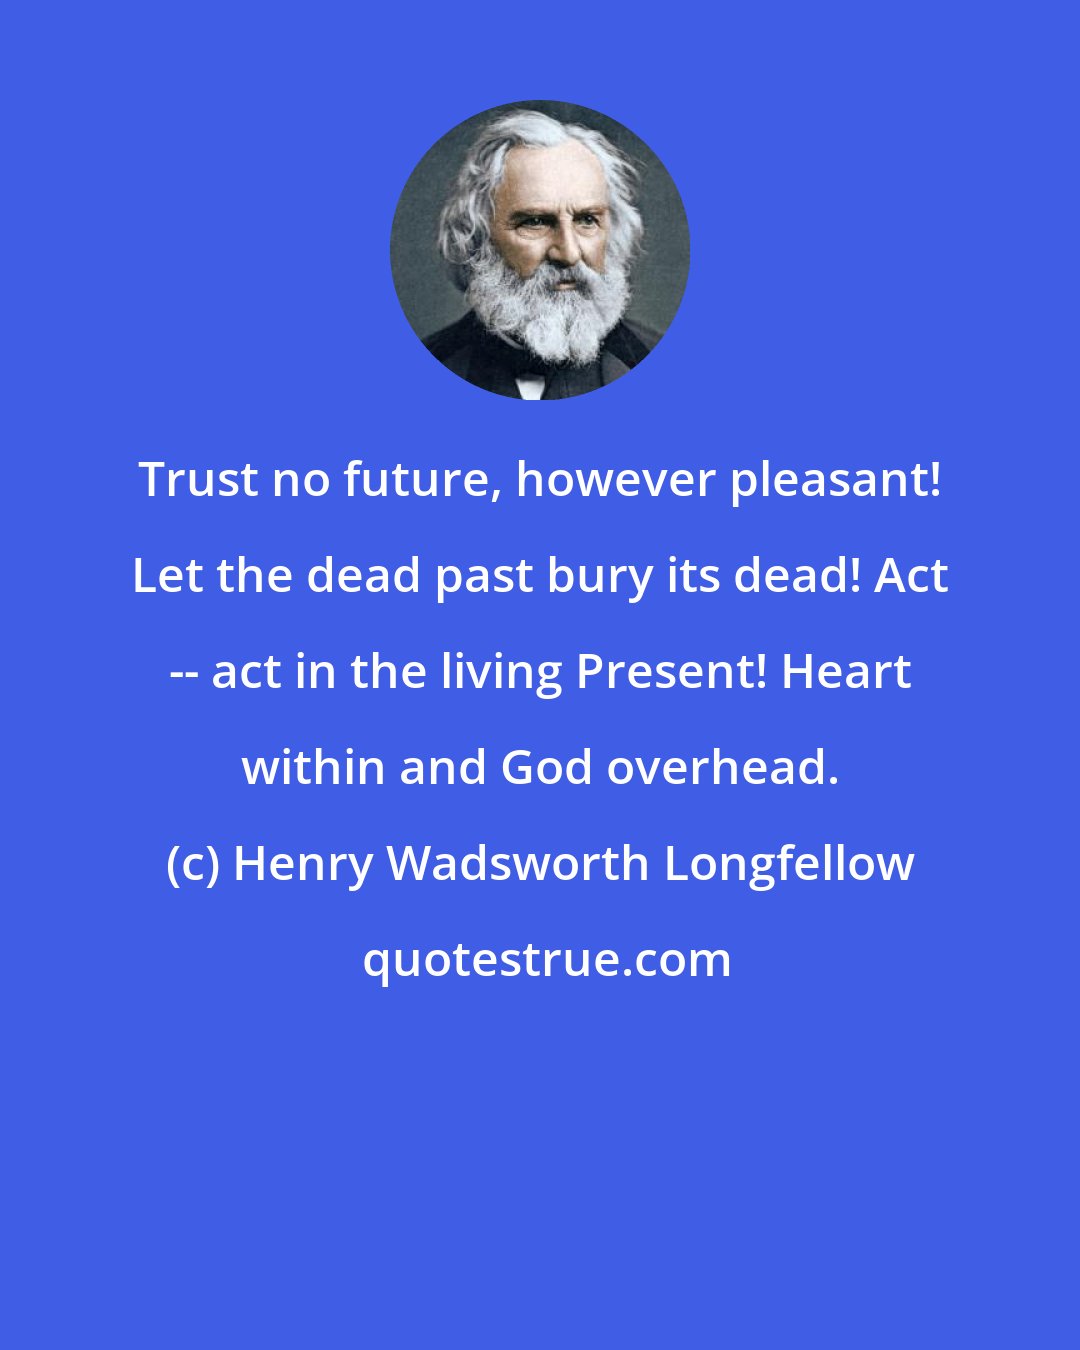 Henry Wadsworth Longfellow: Trust no future, however pleasant! Let the dead past bury its dead! Act -- act in the living Present! Heart within and God overhead.